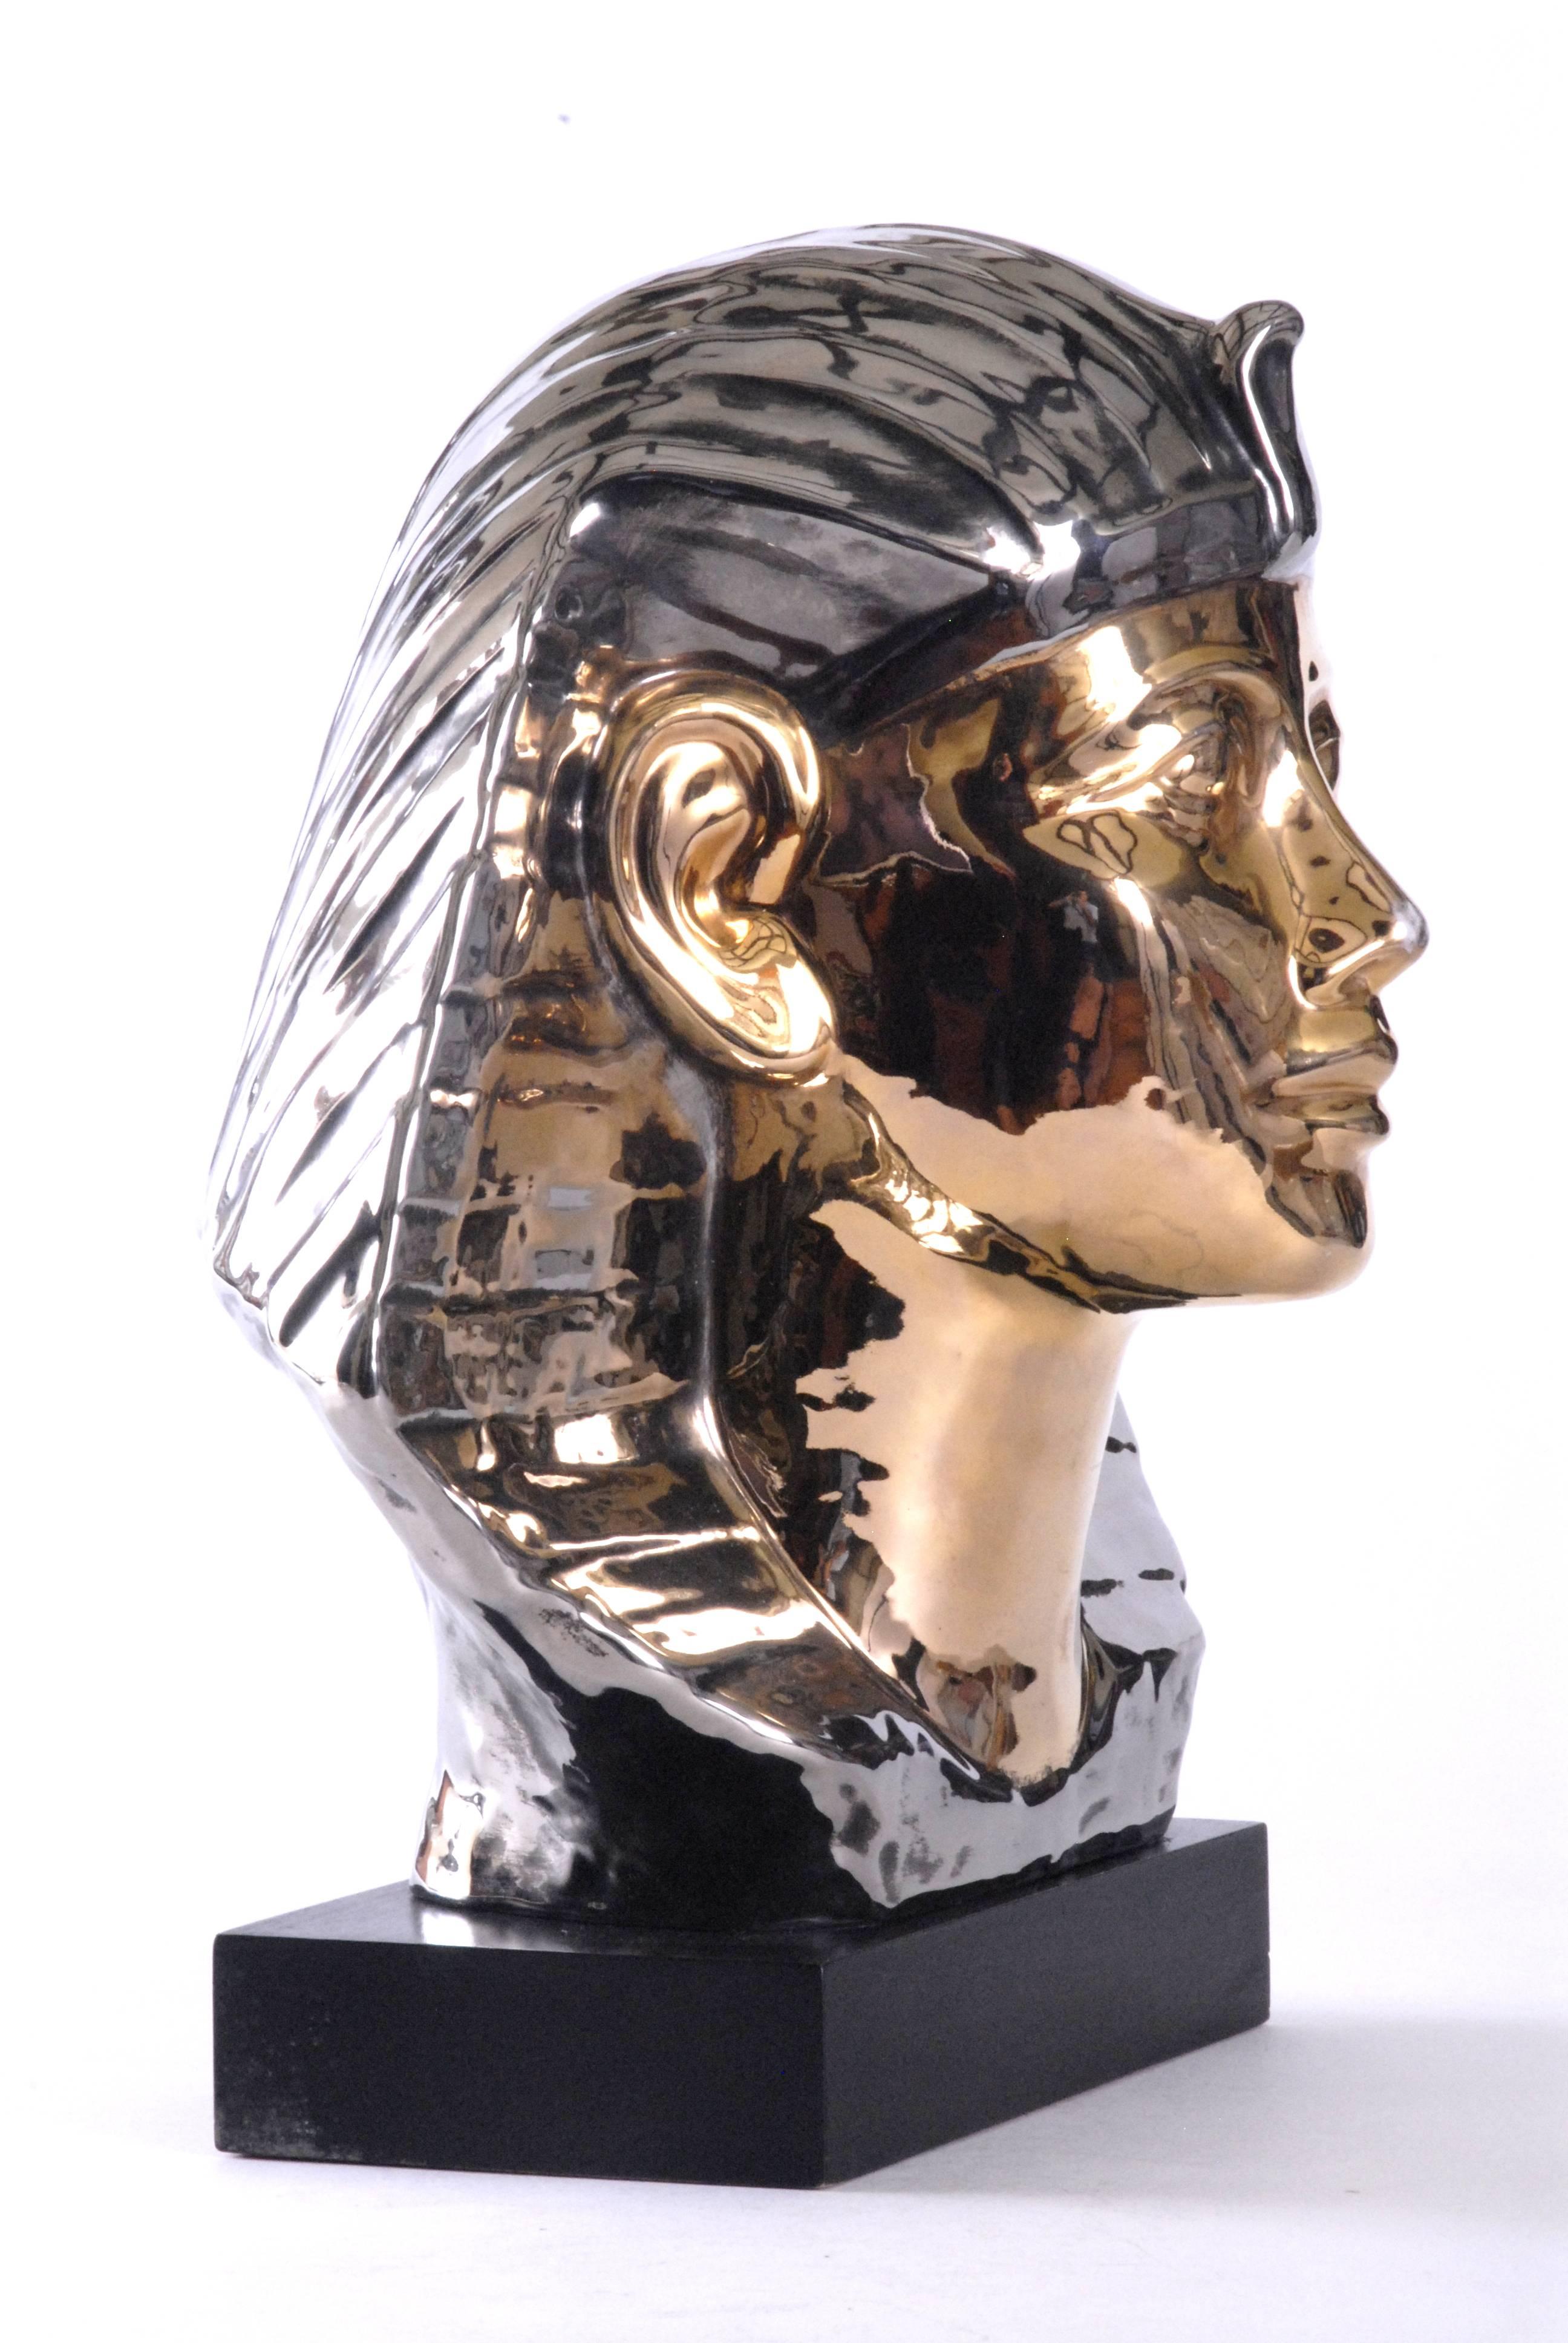 A brilliant Pharaoh's head with bright metallic glazes of silver and gold mounted on a black finished wooden base. Marked with a 'Z' on the base. Of large size this is an imposing decorative piece.